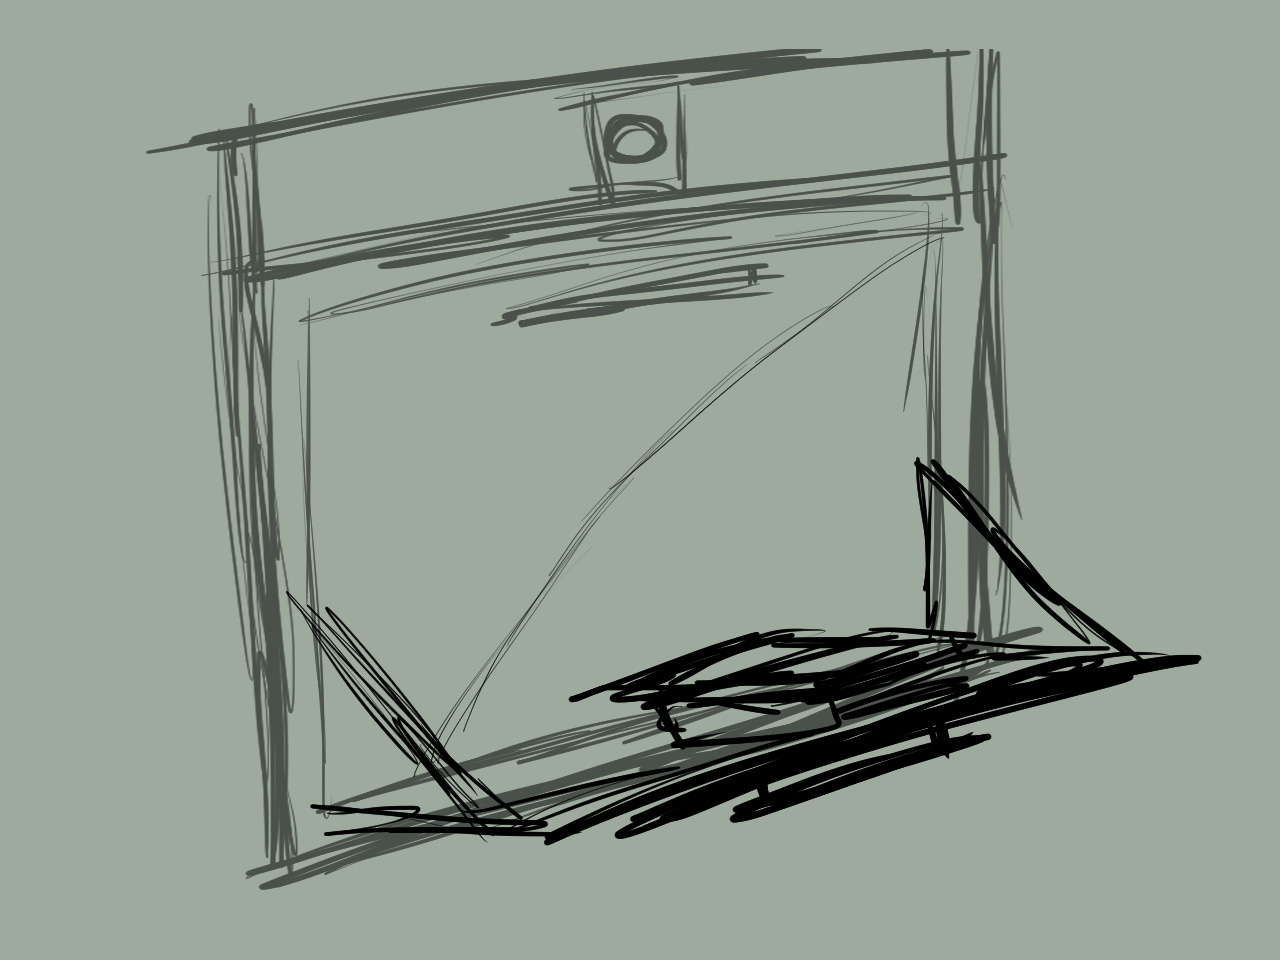 rough sketch of a trash compactor with the open and closed versions of the chute door overlaid